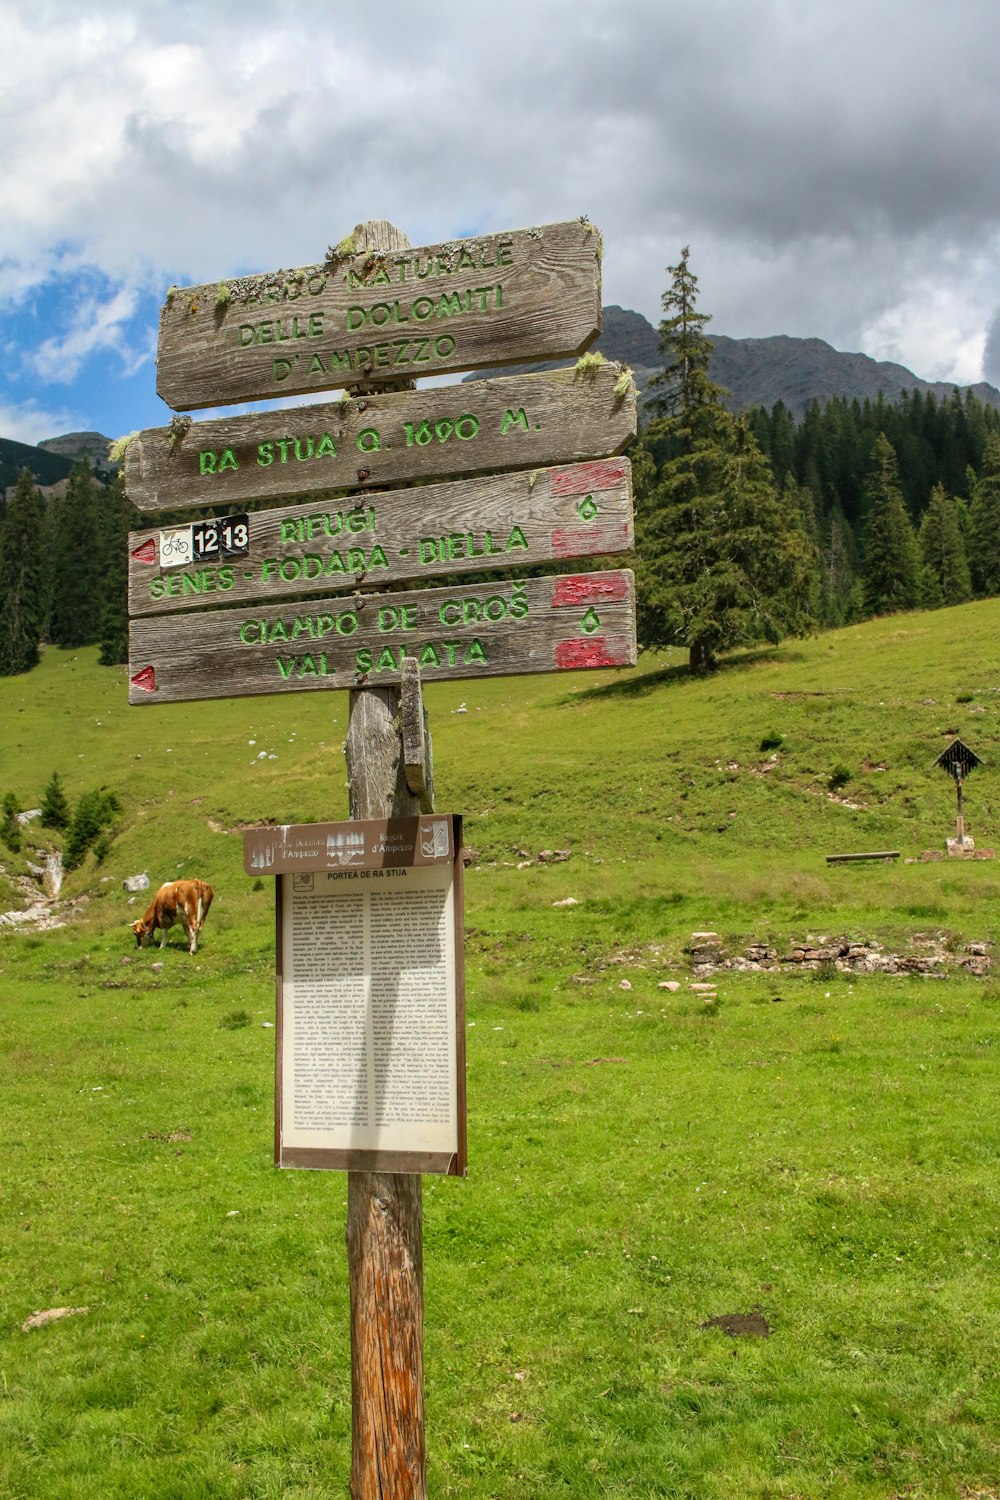 a wooden sign in the middle of a grassy field